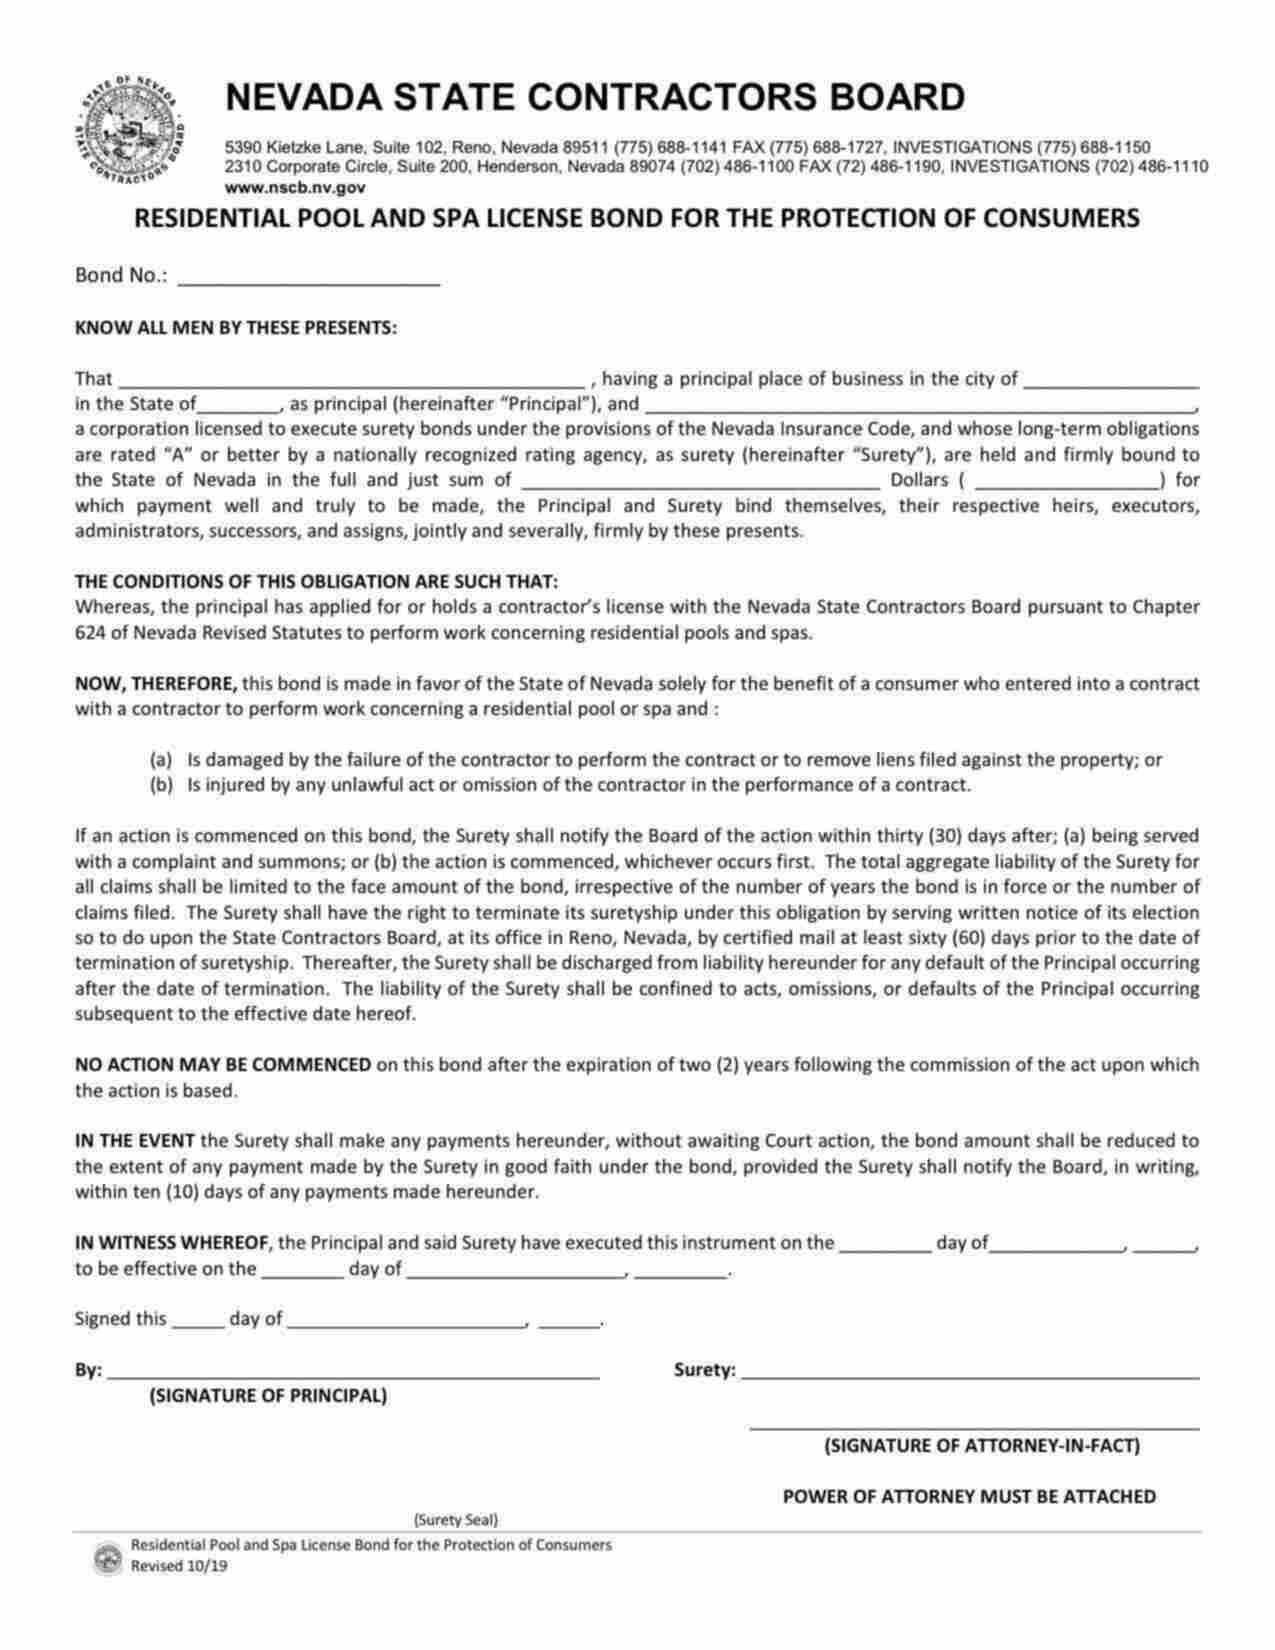 Nevada Residential Pool and Spa License Bond Form